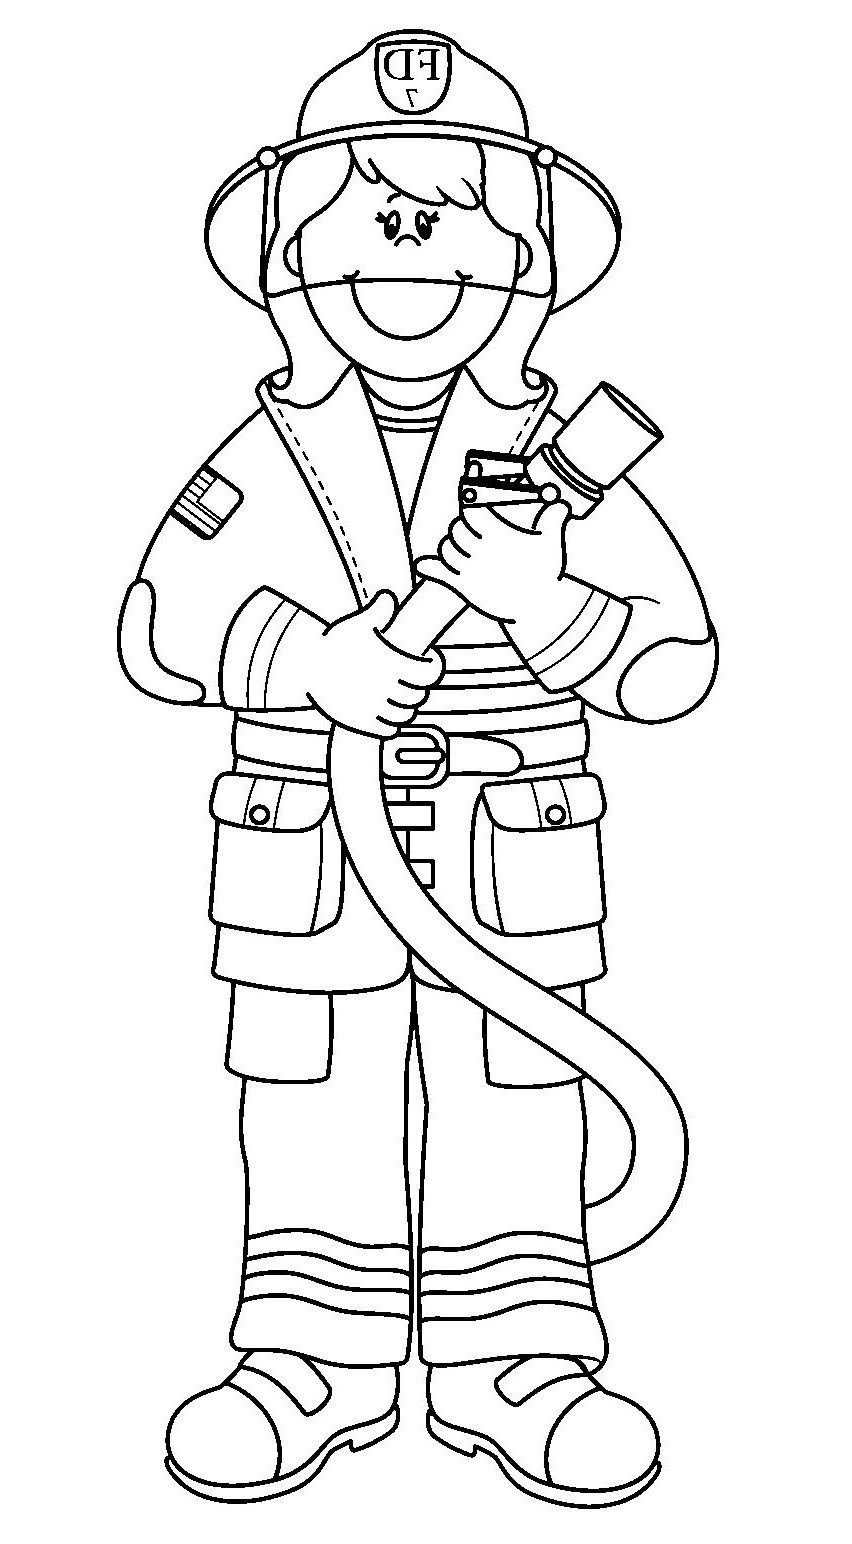 25+ Amazing Image of Fireman Coloring Pages - davemelillo.com | Firefighter  clipart, Firefighter pictures, Firefighter